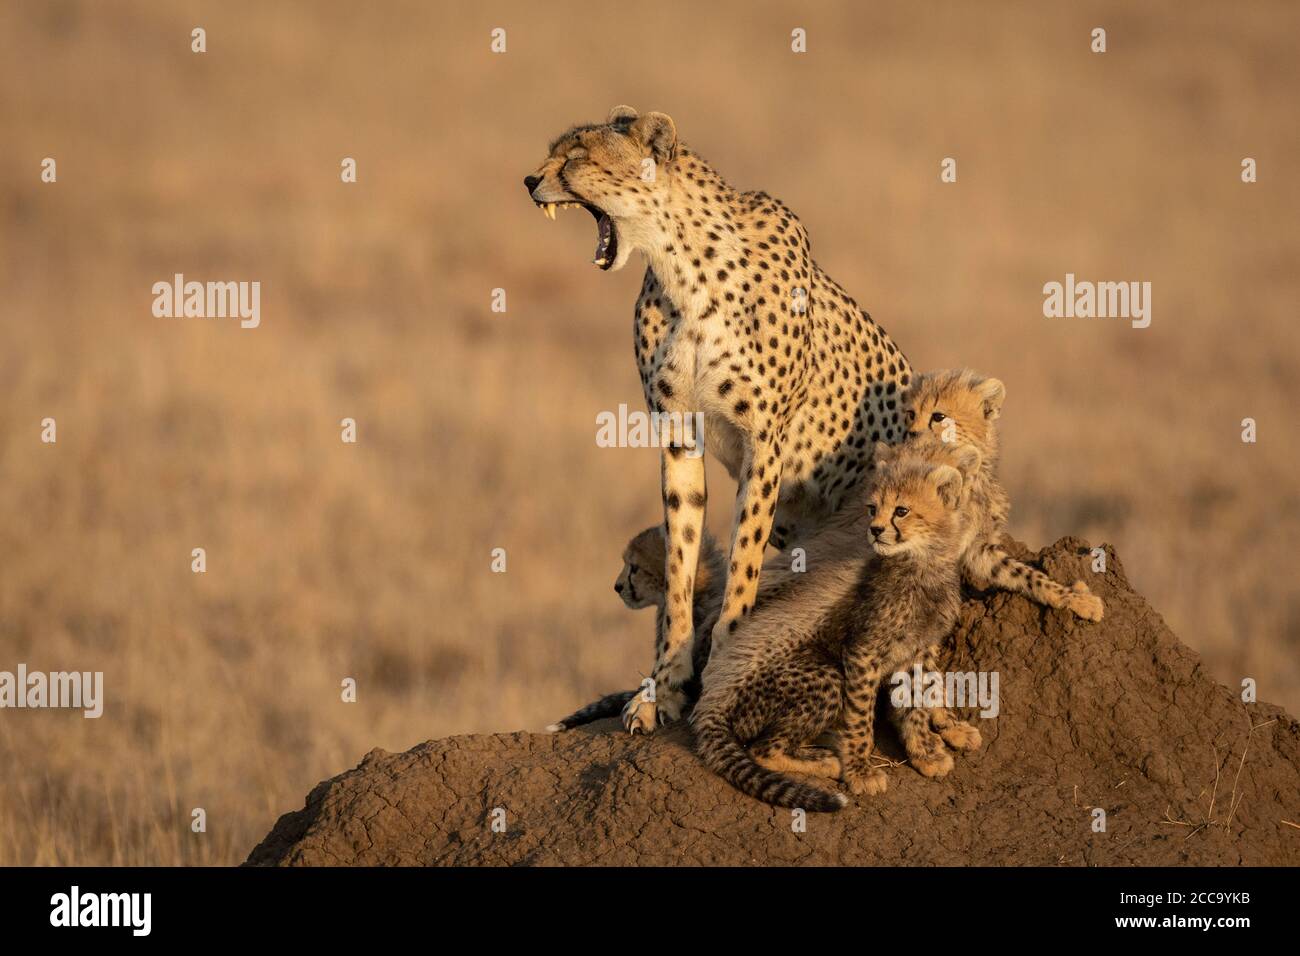 Mother and baby cheetahs sitting on a termite mound with the female cheetah yawning showing her teeth in Serengeti National Park in Tanzania Stock Photo